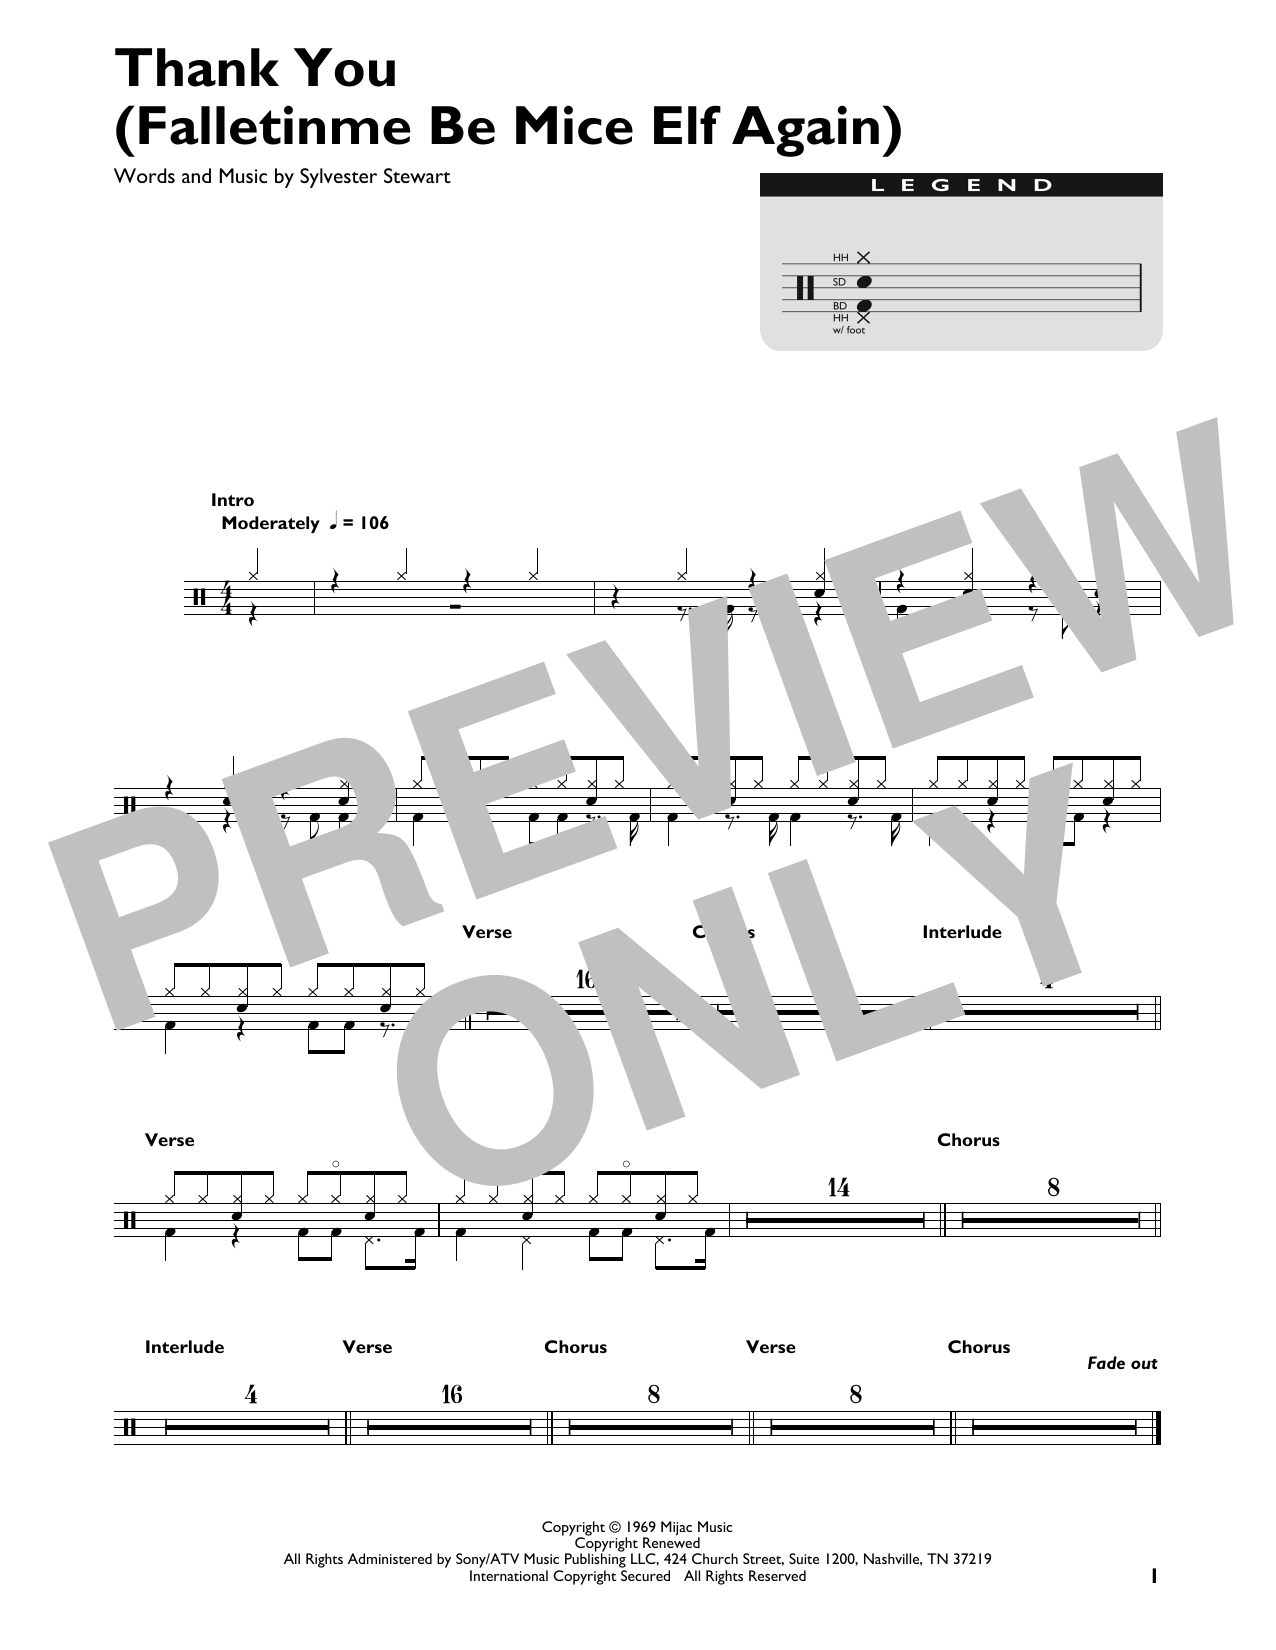 Download Sly & The Family Stone Thank You (Falletinme Be Mice Elf Again Sheet Music